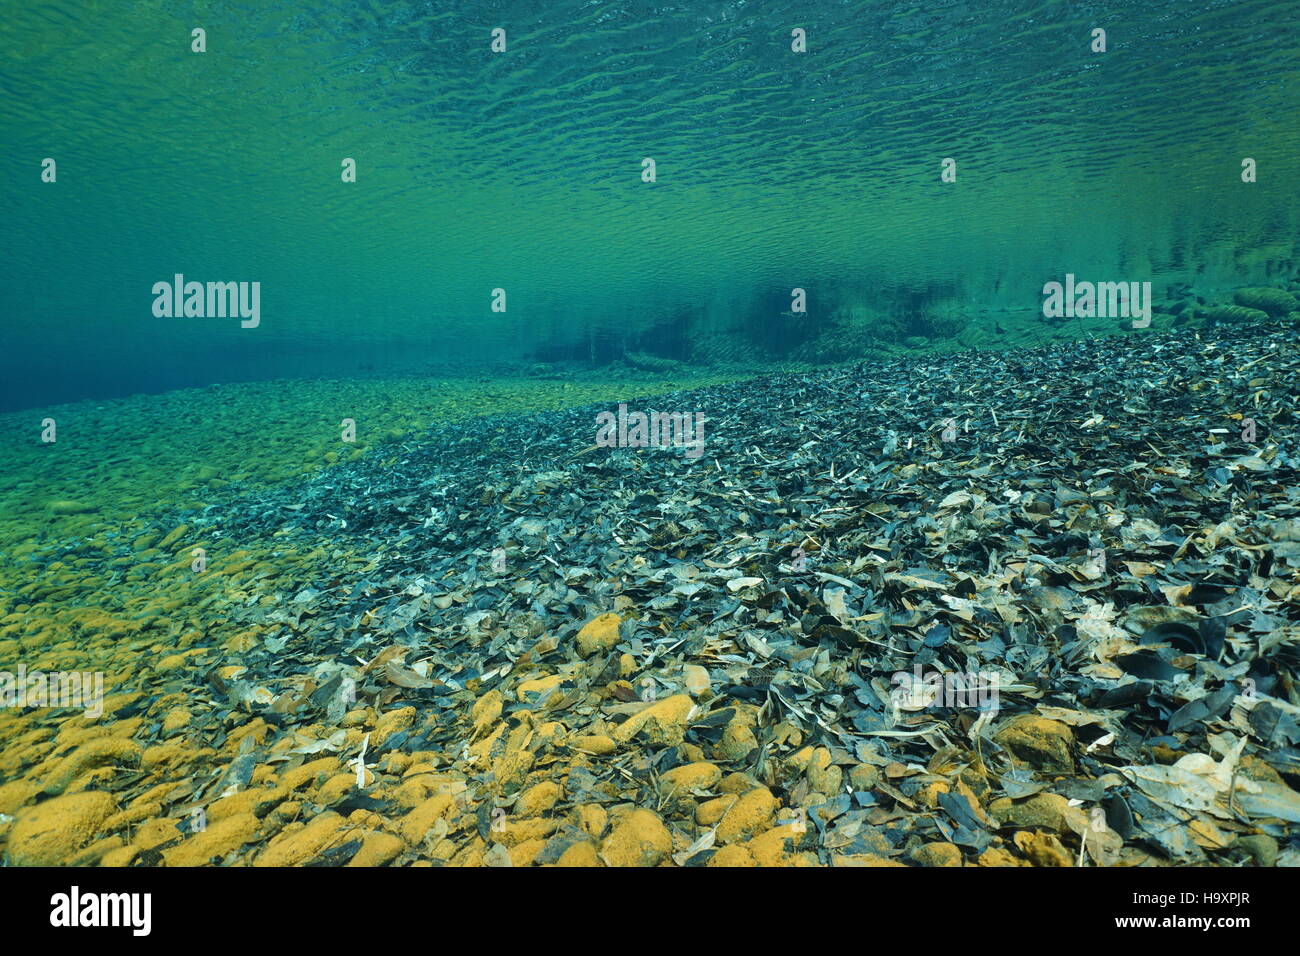 Underwater in a river with clear water and dead leaves on the riverbed, natural scene, Dumbea river, New Caledonia south Pacific Stock Photo